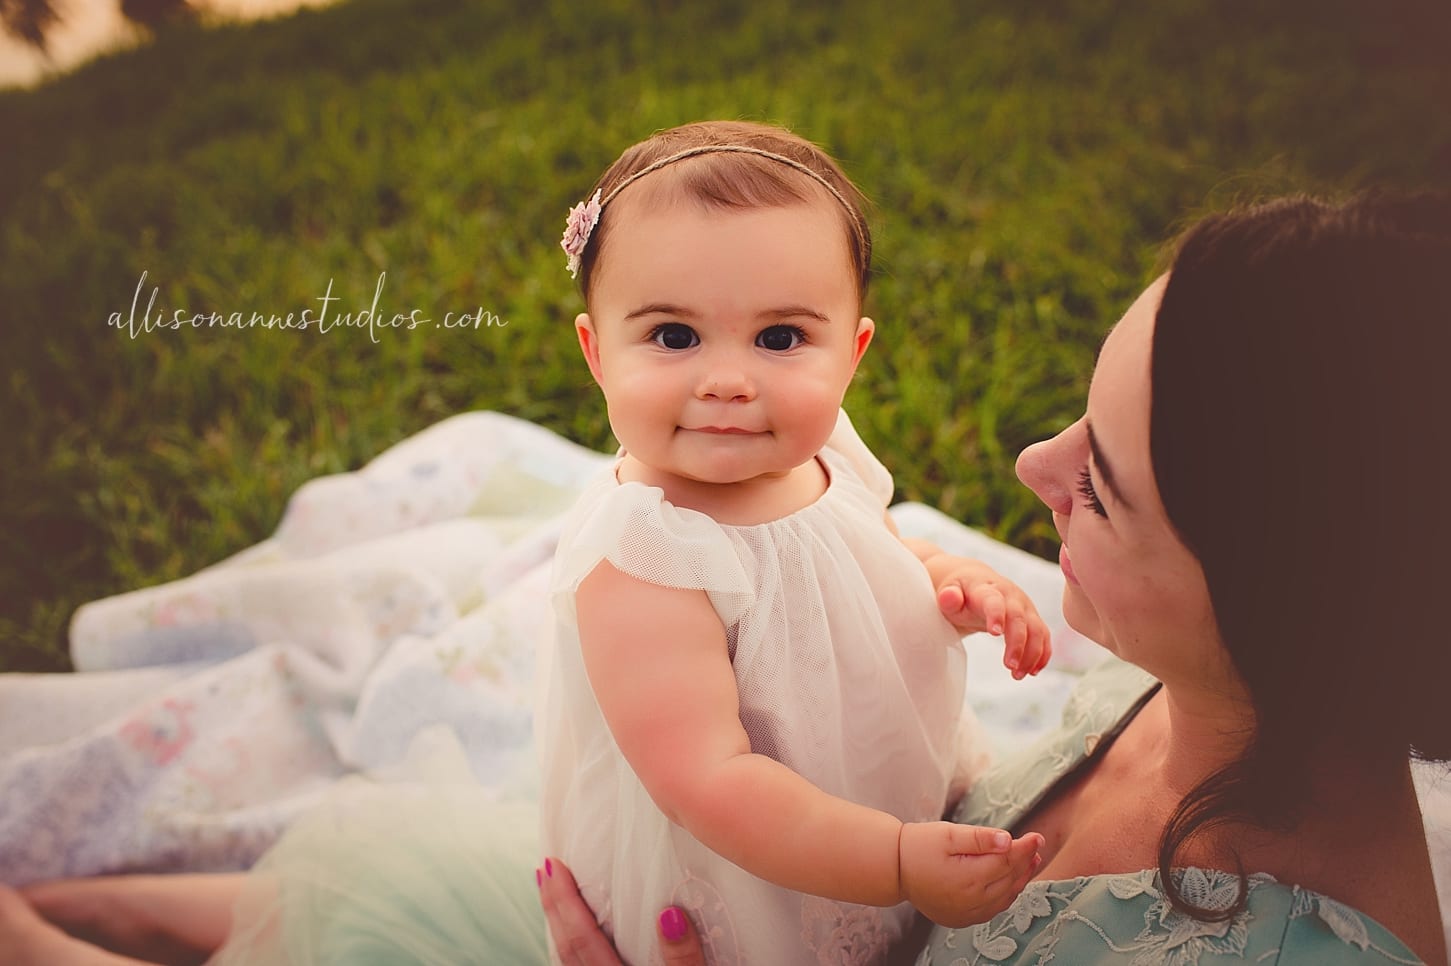 hot air balloon, best photographer in South Jersey, cake Smash, first Birthday, modcloth, style, shop Rite cake, big brown eyes, shy baby, beautiful family, love, Allison Gallagher, AllisonAnne Studios, Hammonton, new clients, Google search